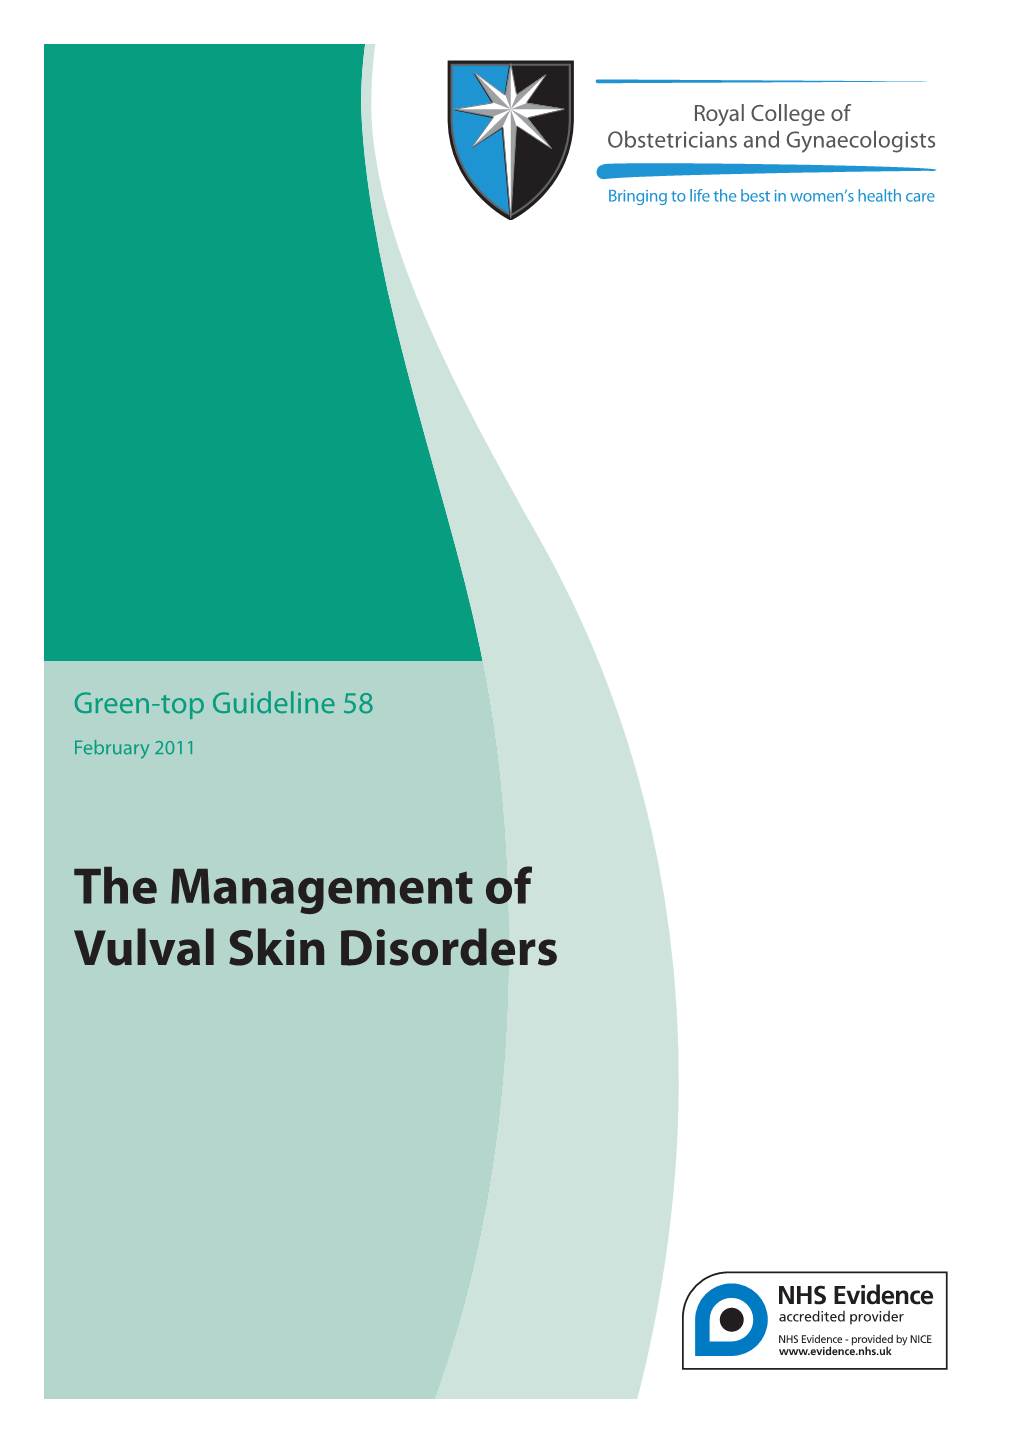 The Management of Vulval Skin Disorders the Management of Vulval Skin Disorders